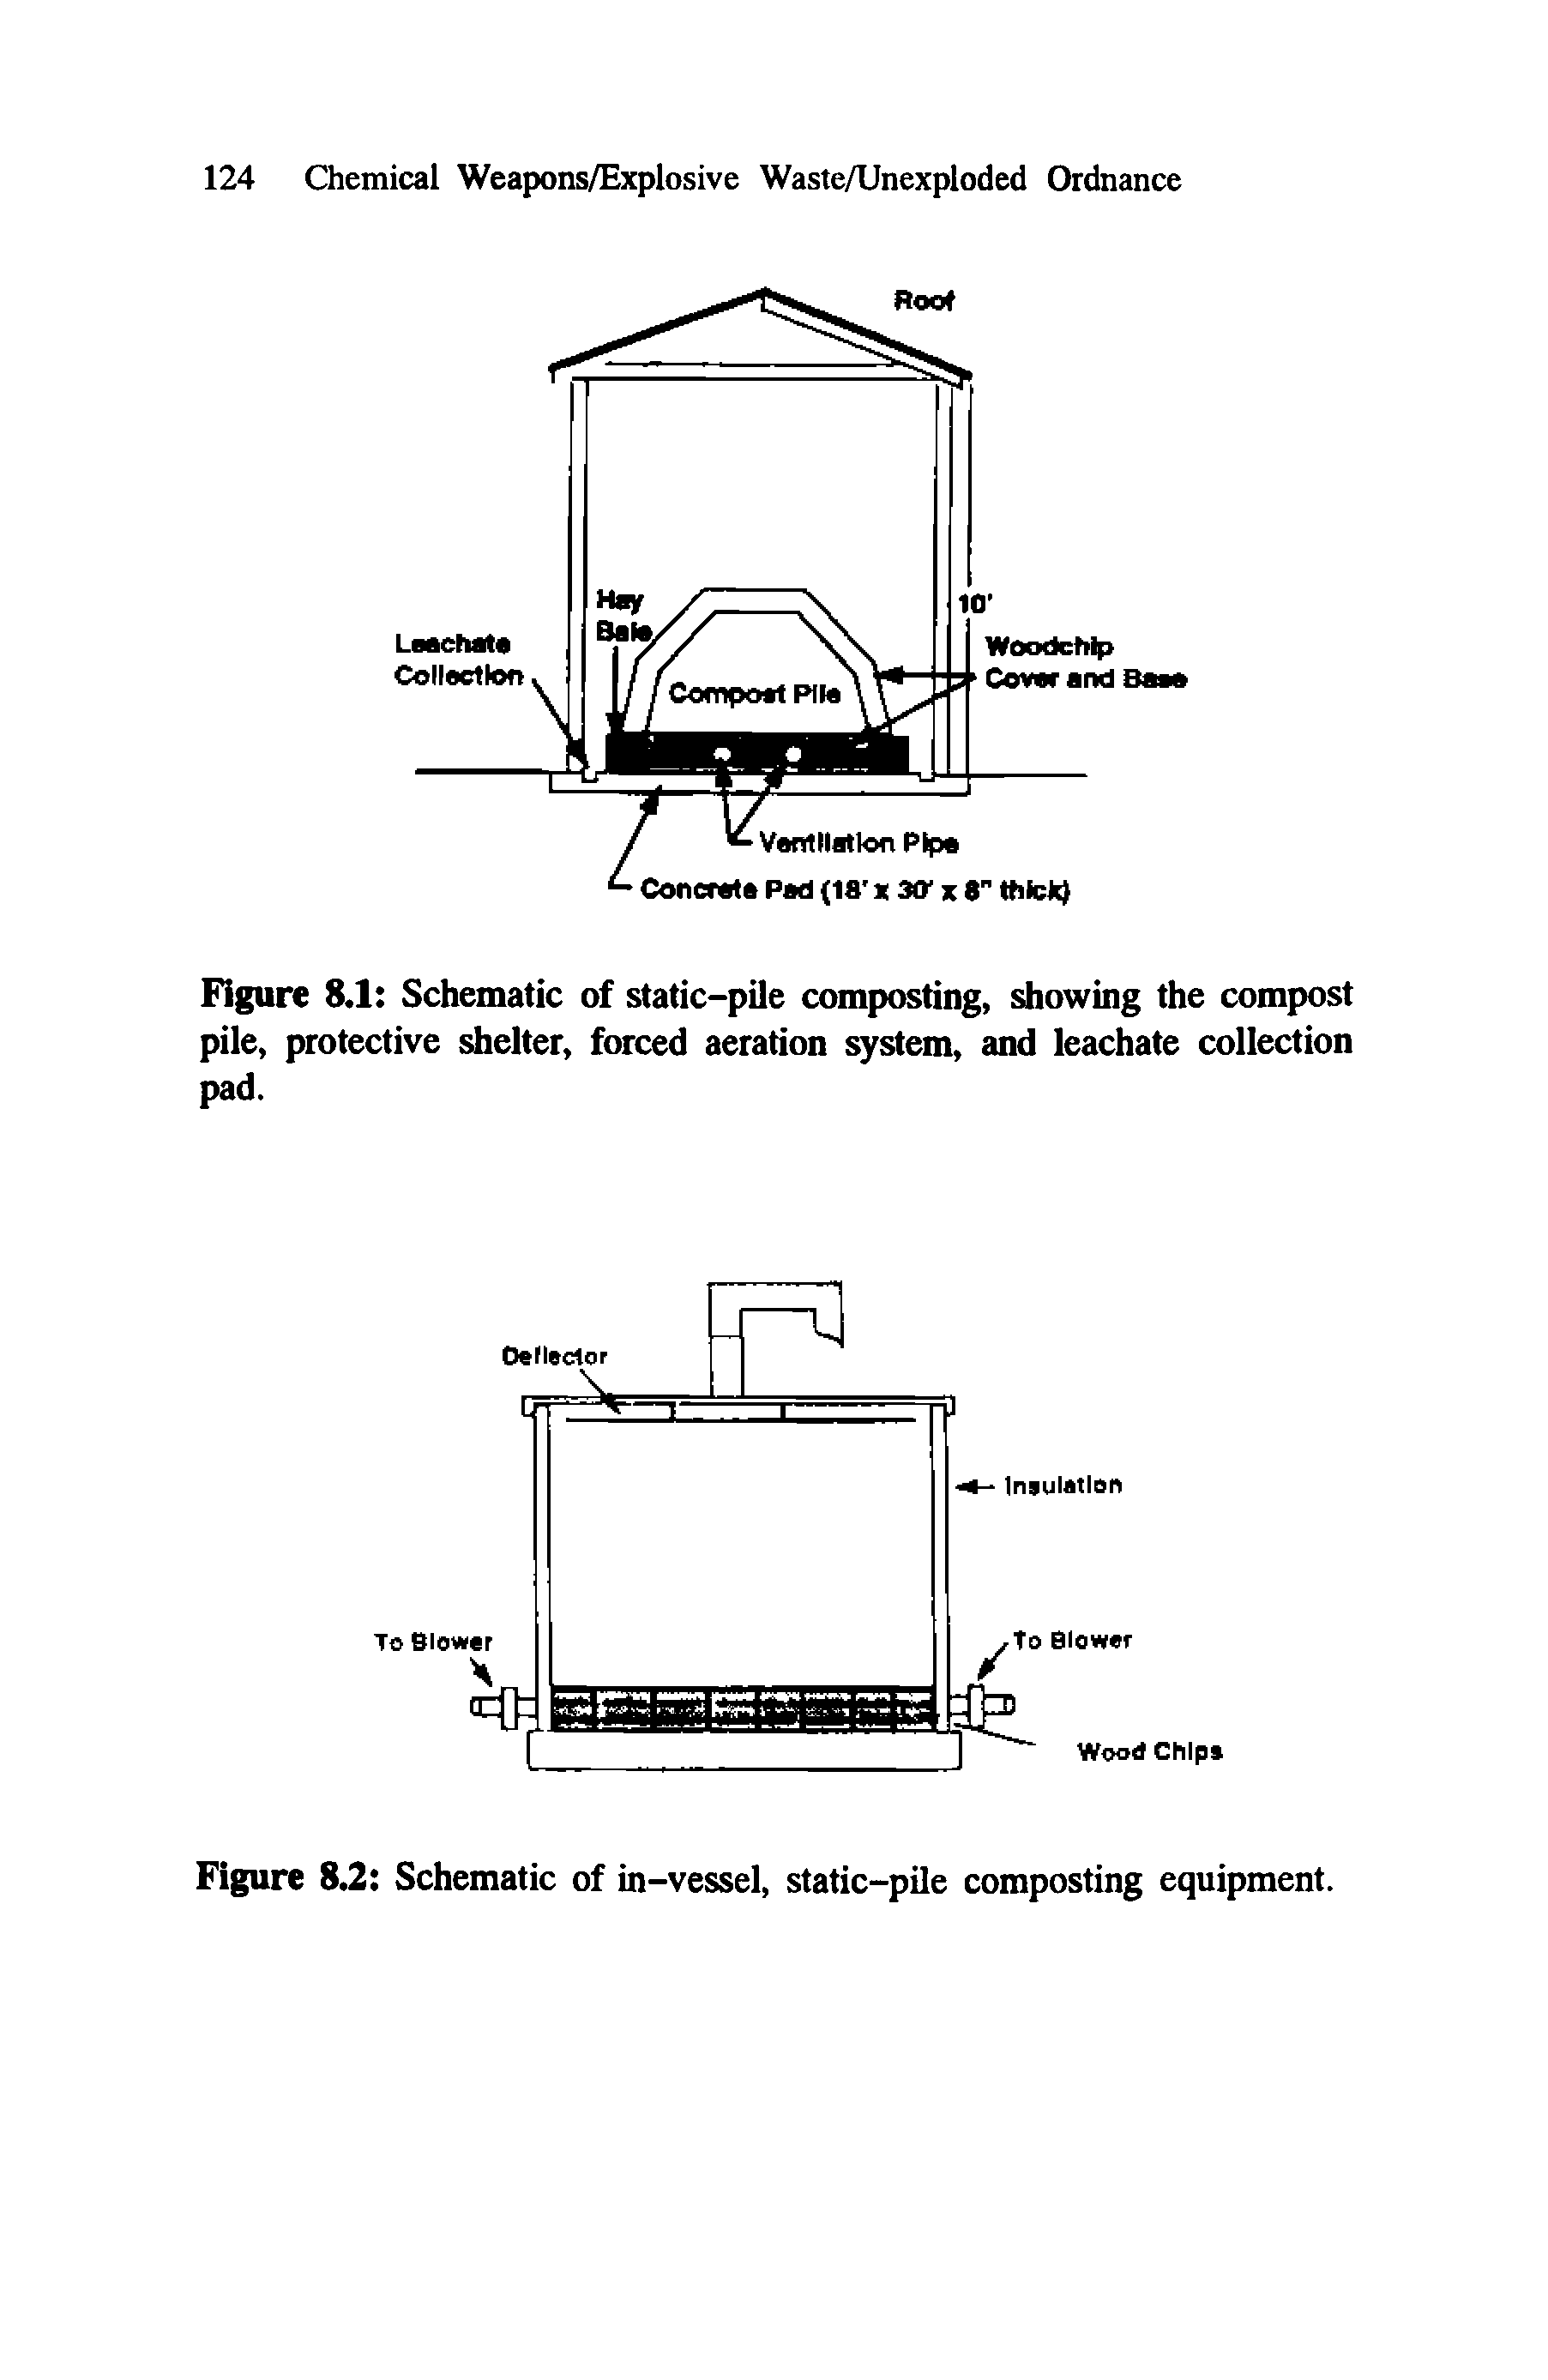 Figure 8.1 Schematic of static-pile composting, showing the compost pile, protective shelter, forced aeration system, and leachate collection pad.